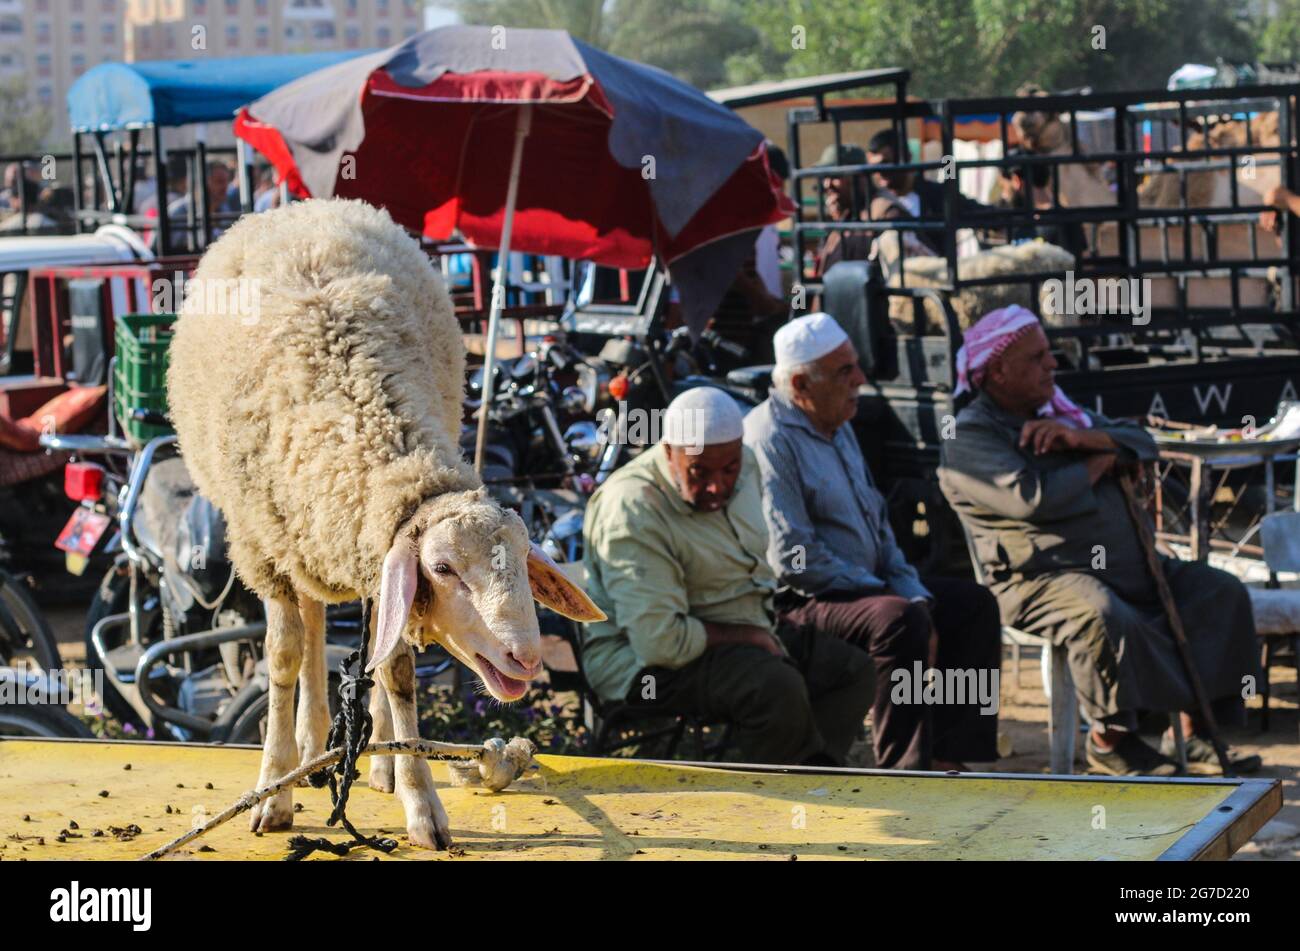 Palestinians gather in a livestock market in preparation for the upcoming Muslim Eid al-Adha holiday in Dair Al-Balah city south Gaza Strip. (Photo by Ahmed Zakot / SOPA Images/Sipa USA) Stock Photo